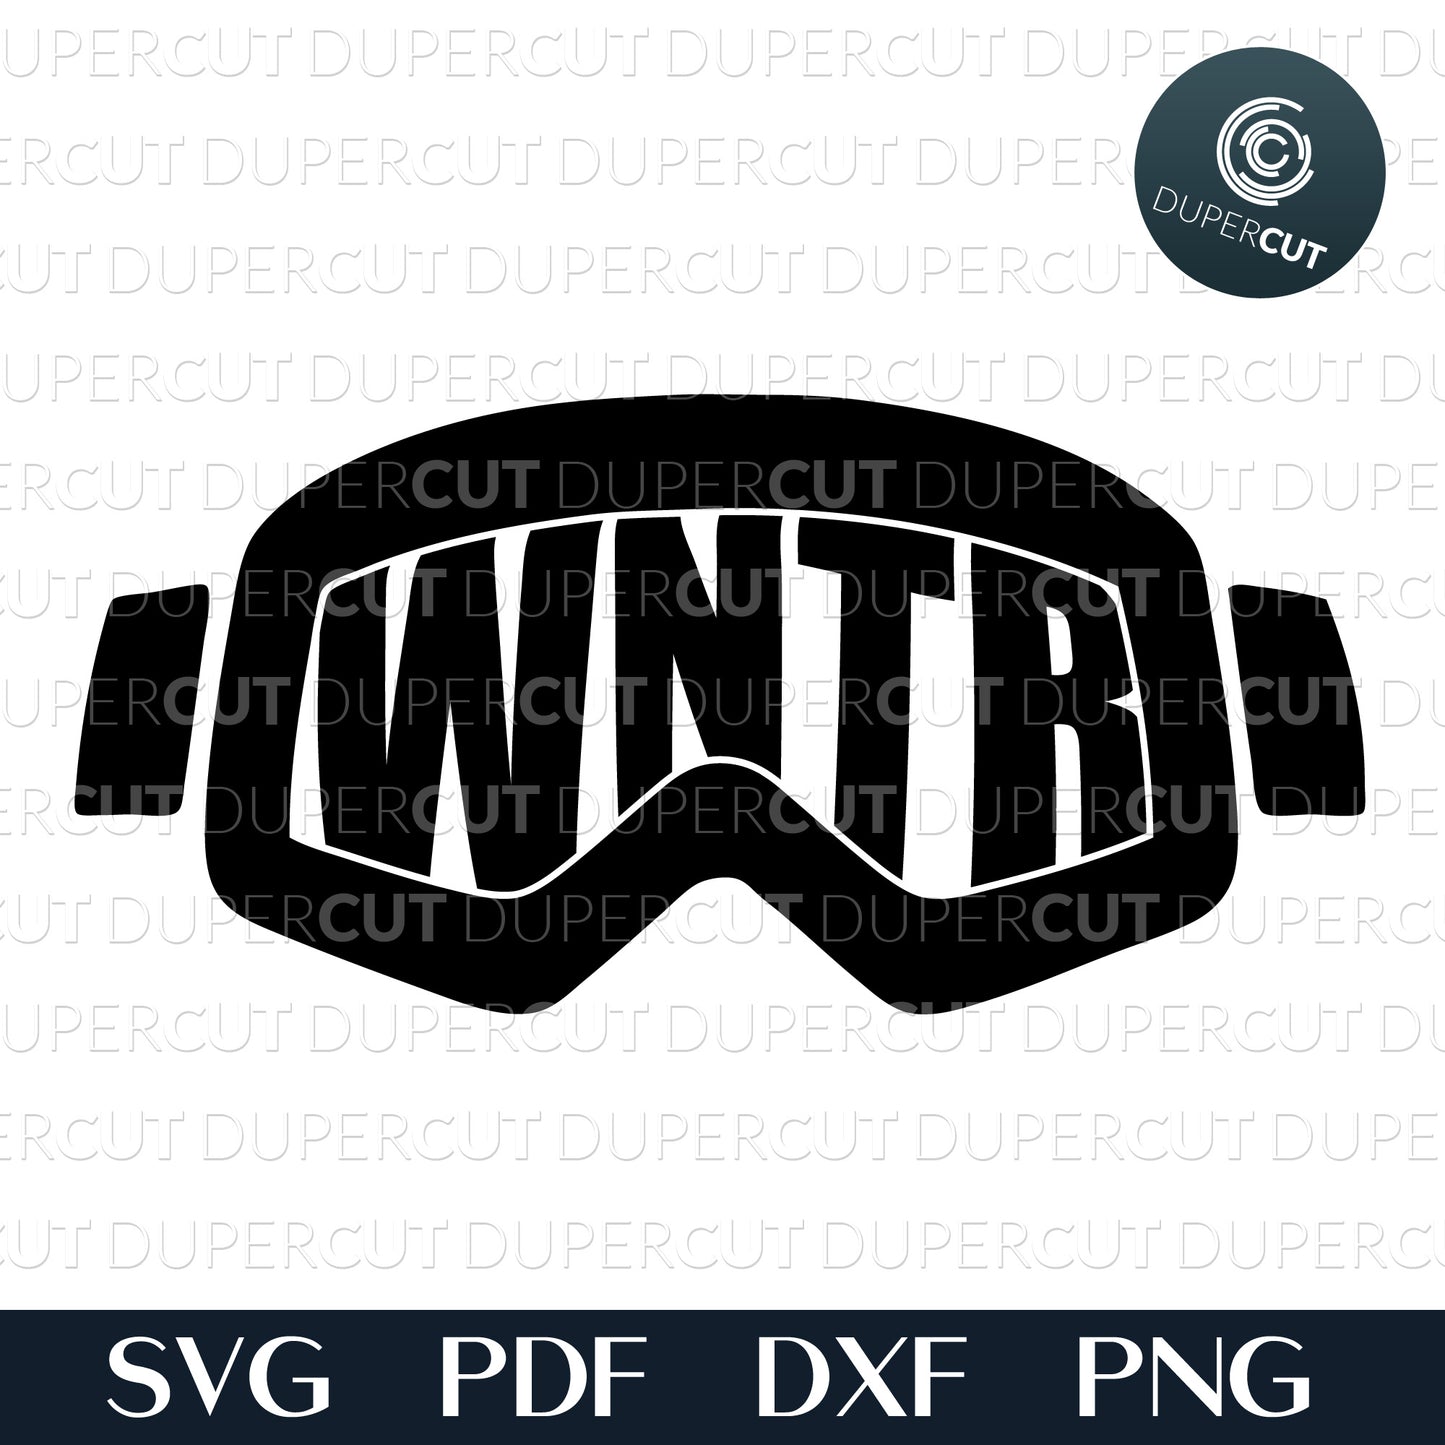 Snowboarding goggles, printable clipart, vinyl stickers. Paper cutting template SVG PNG DXF files. For DIY projects Cricut, Glowforge, Silhouette Cameo, CNC Machines.